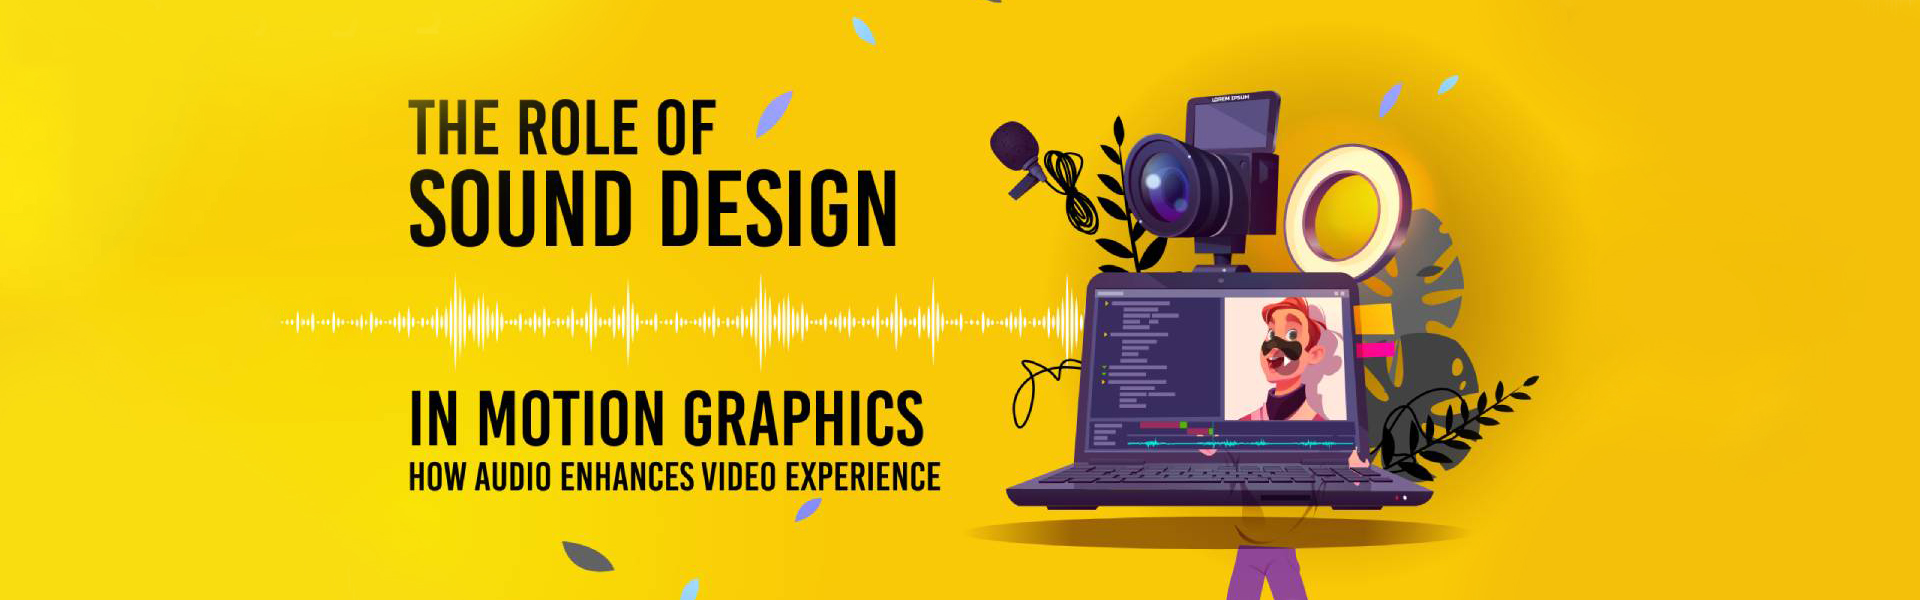 The role of sound design in motion graphics